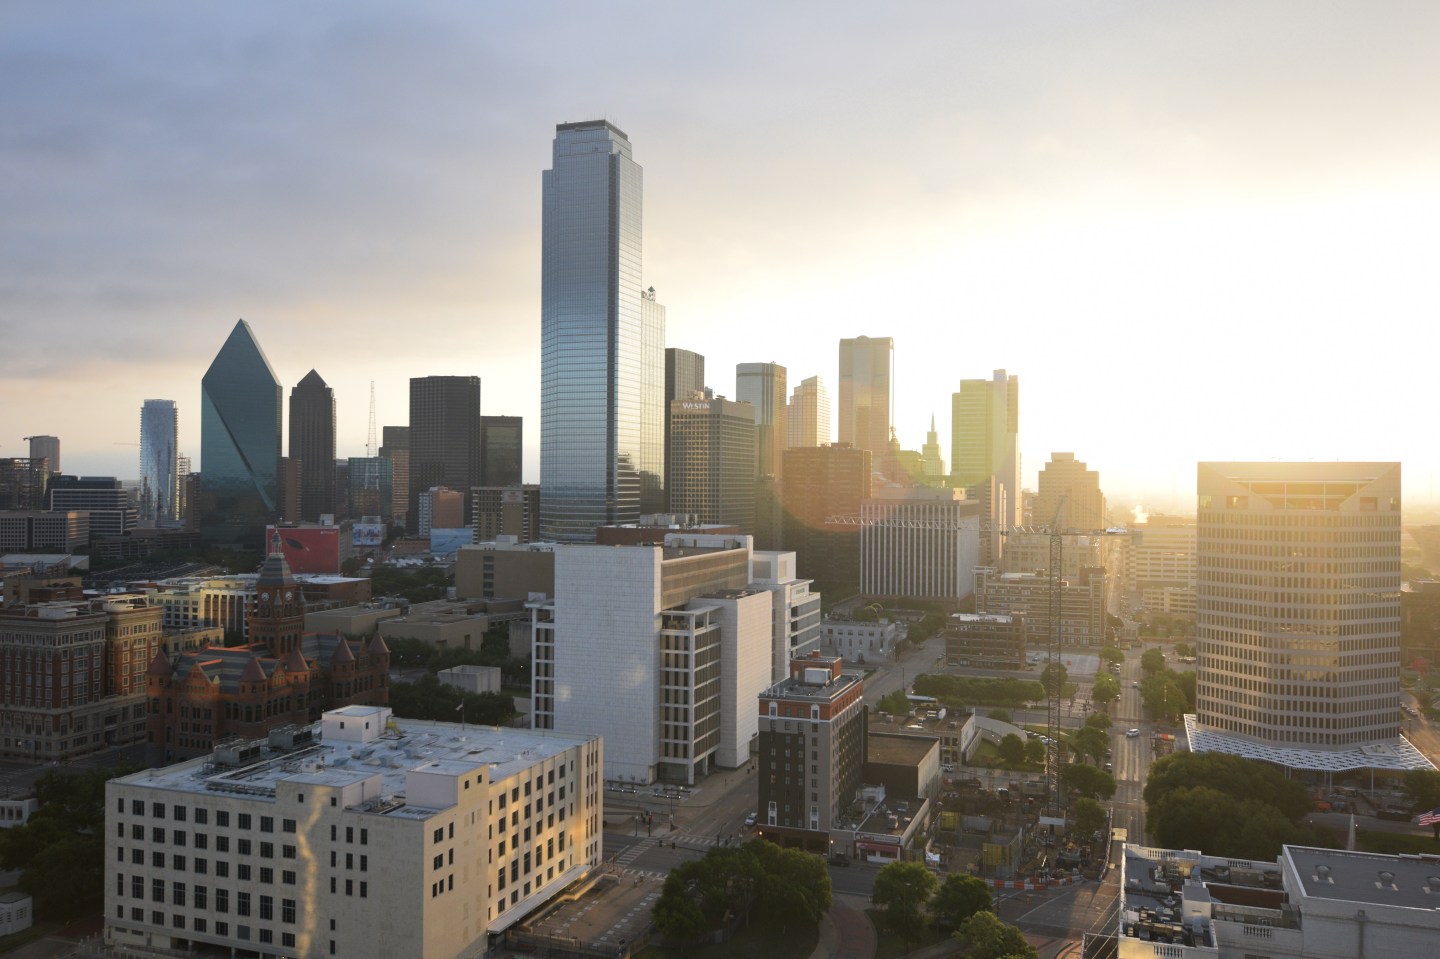 Early morning view of the Dallas, TX skyline. (Photo by: HUM Images/Universal Images Group via Getty Images)